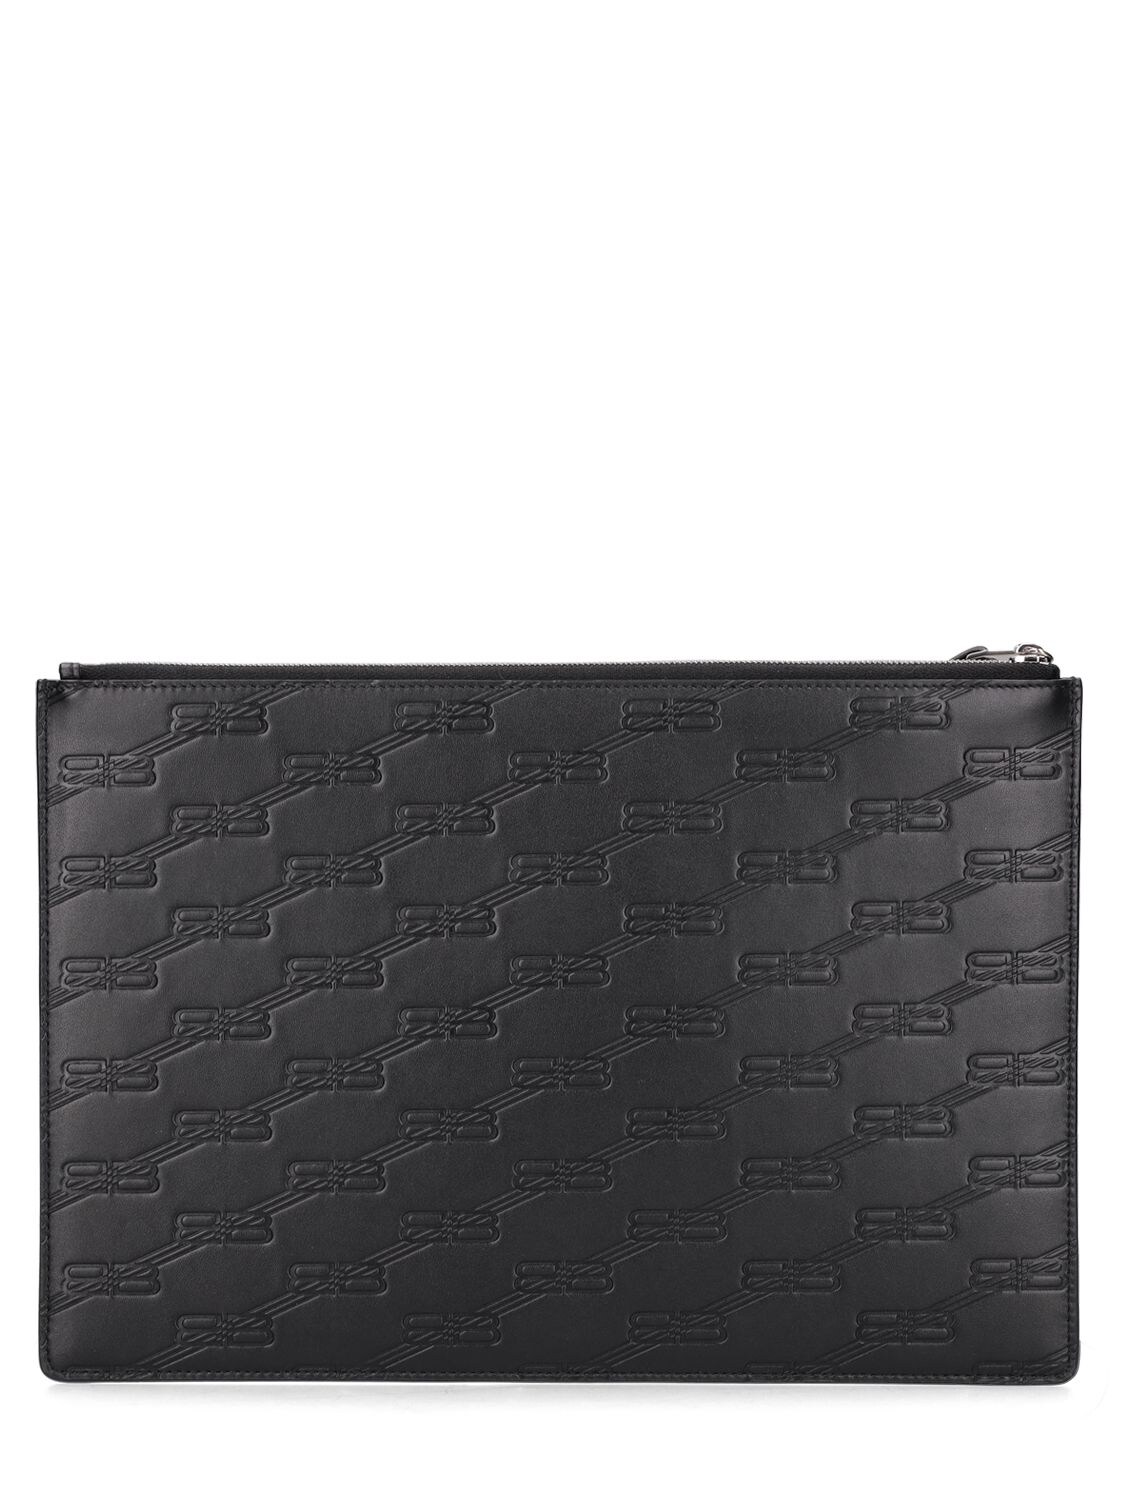 Shop Balenciaga Embossed Leather Pouch W/ Wrist Strap In Black